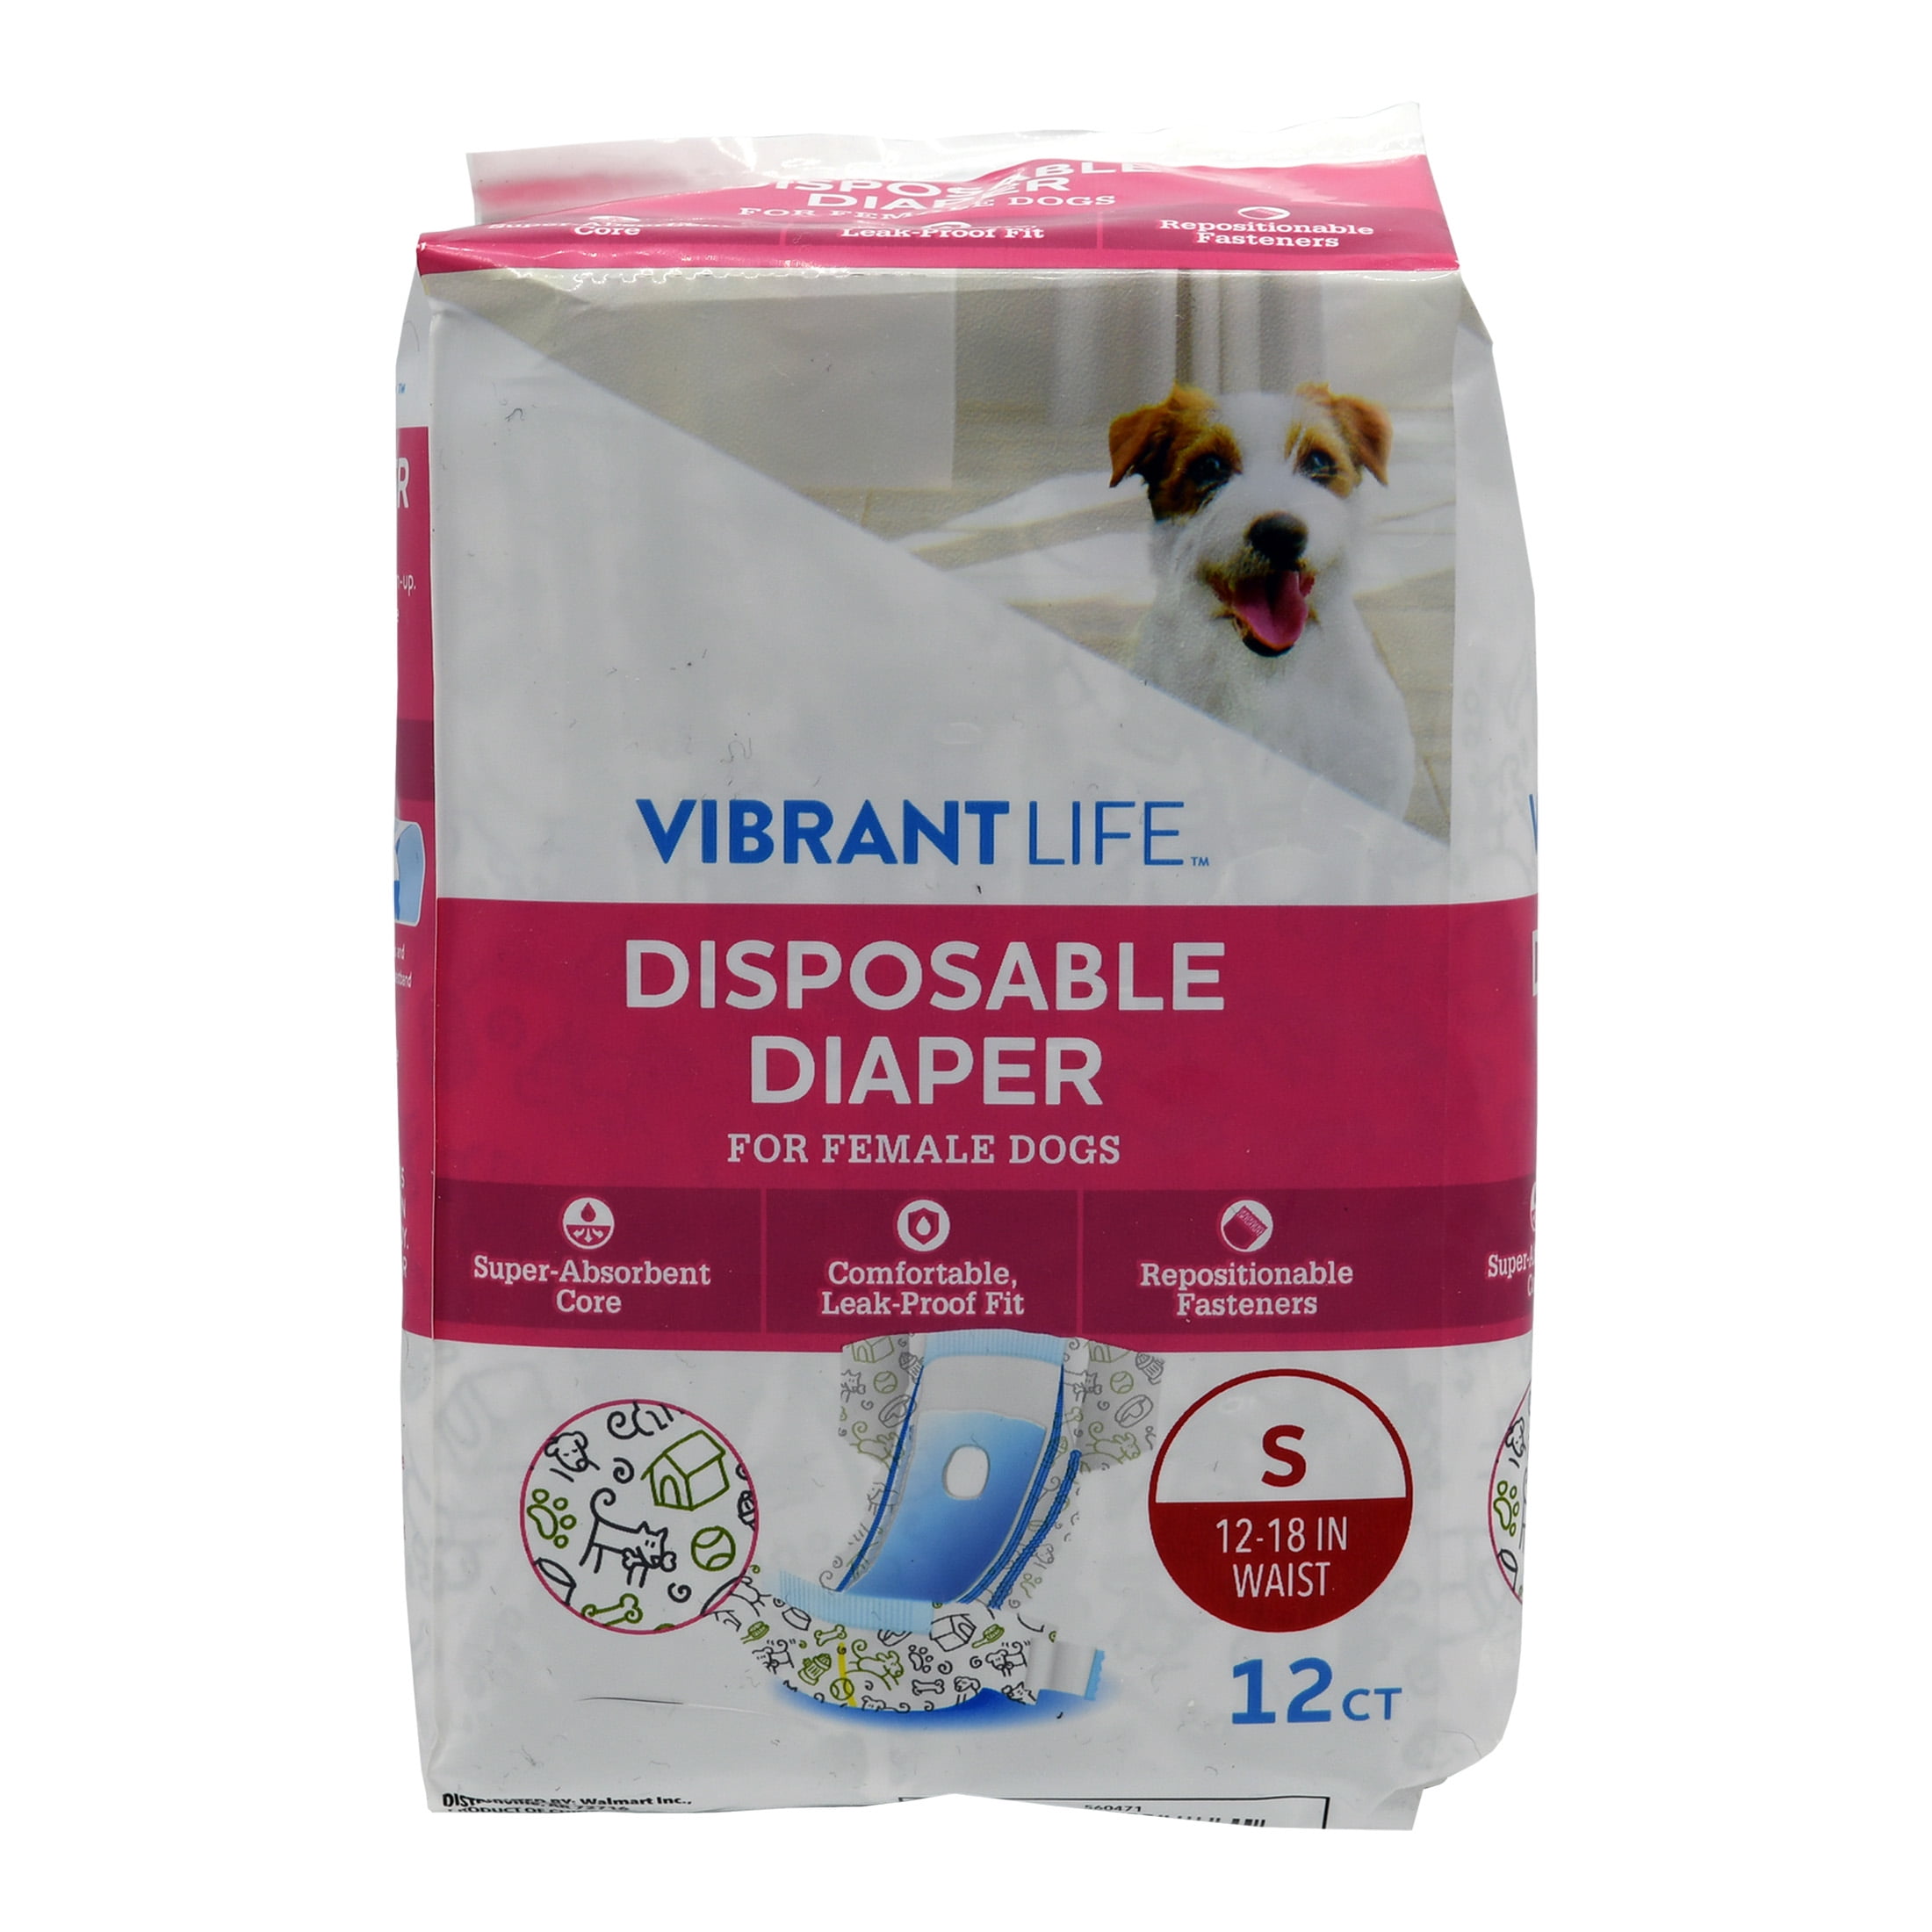 Vibrant Life Disposable Diapers for Female Dogs - Small